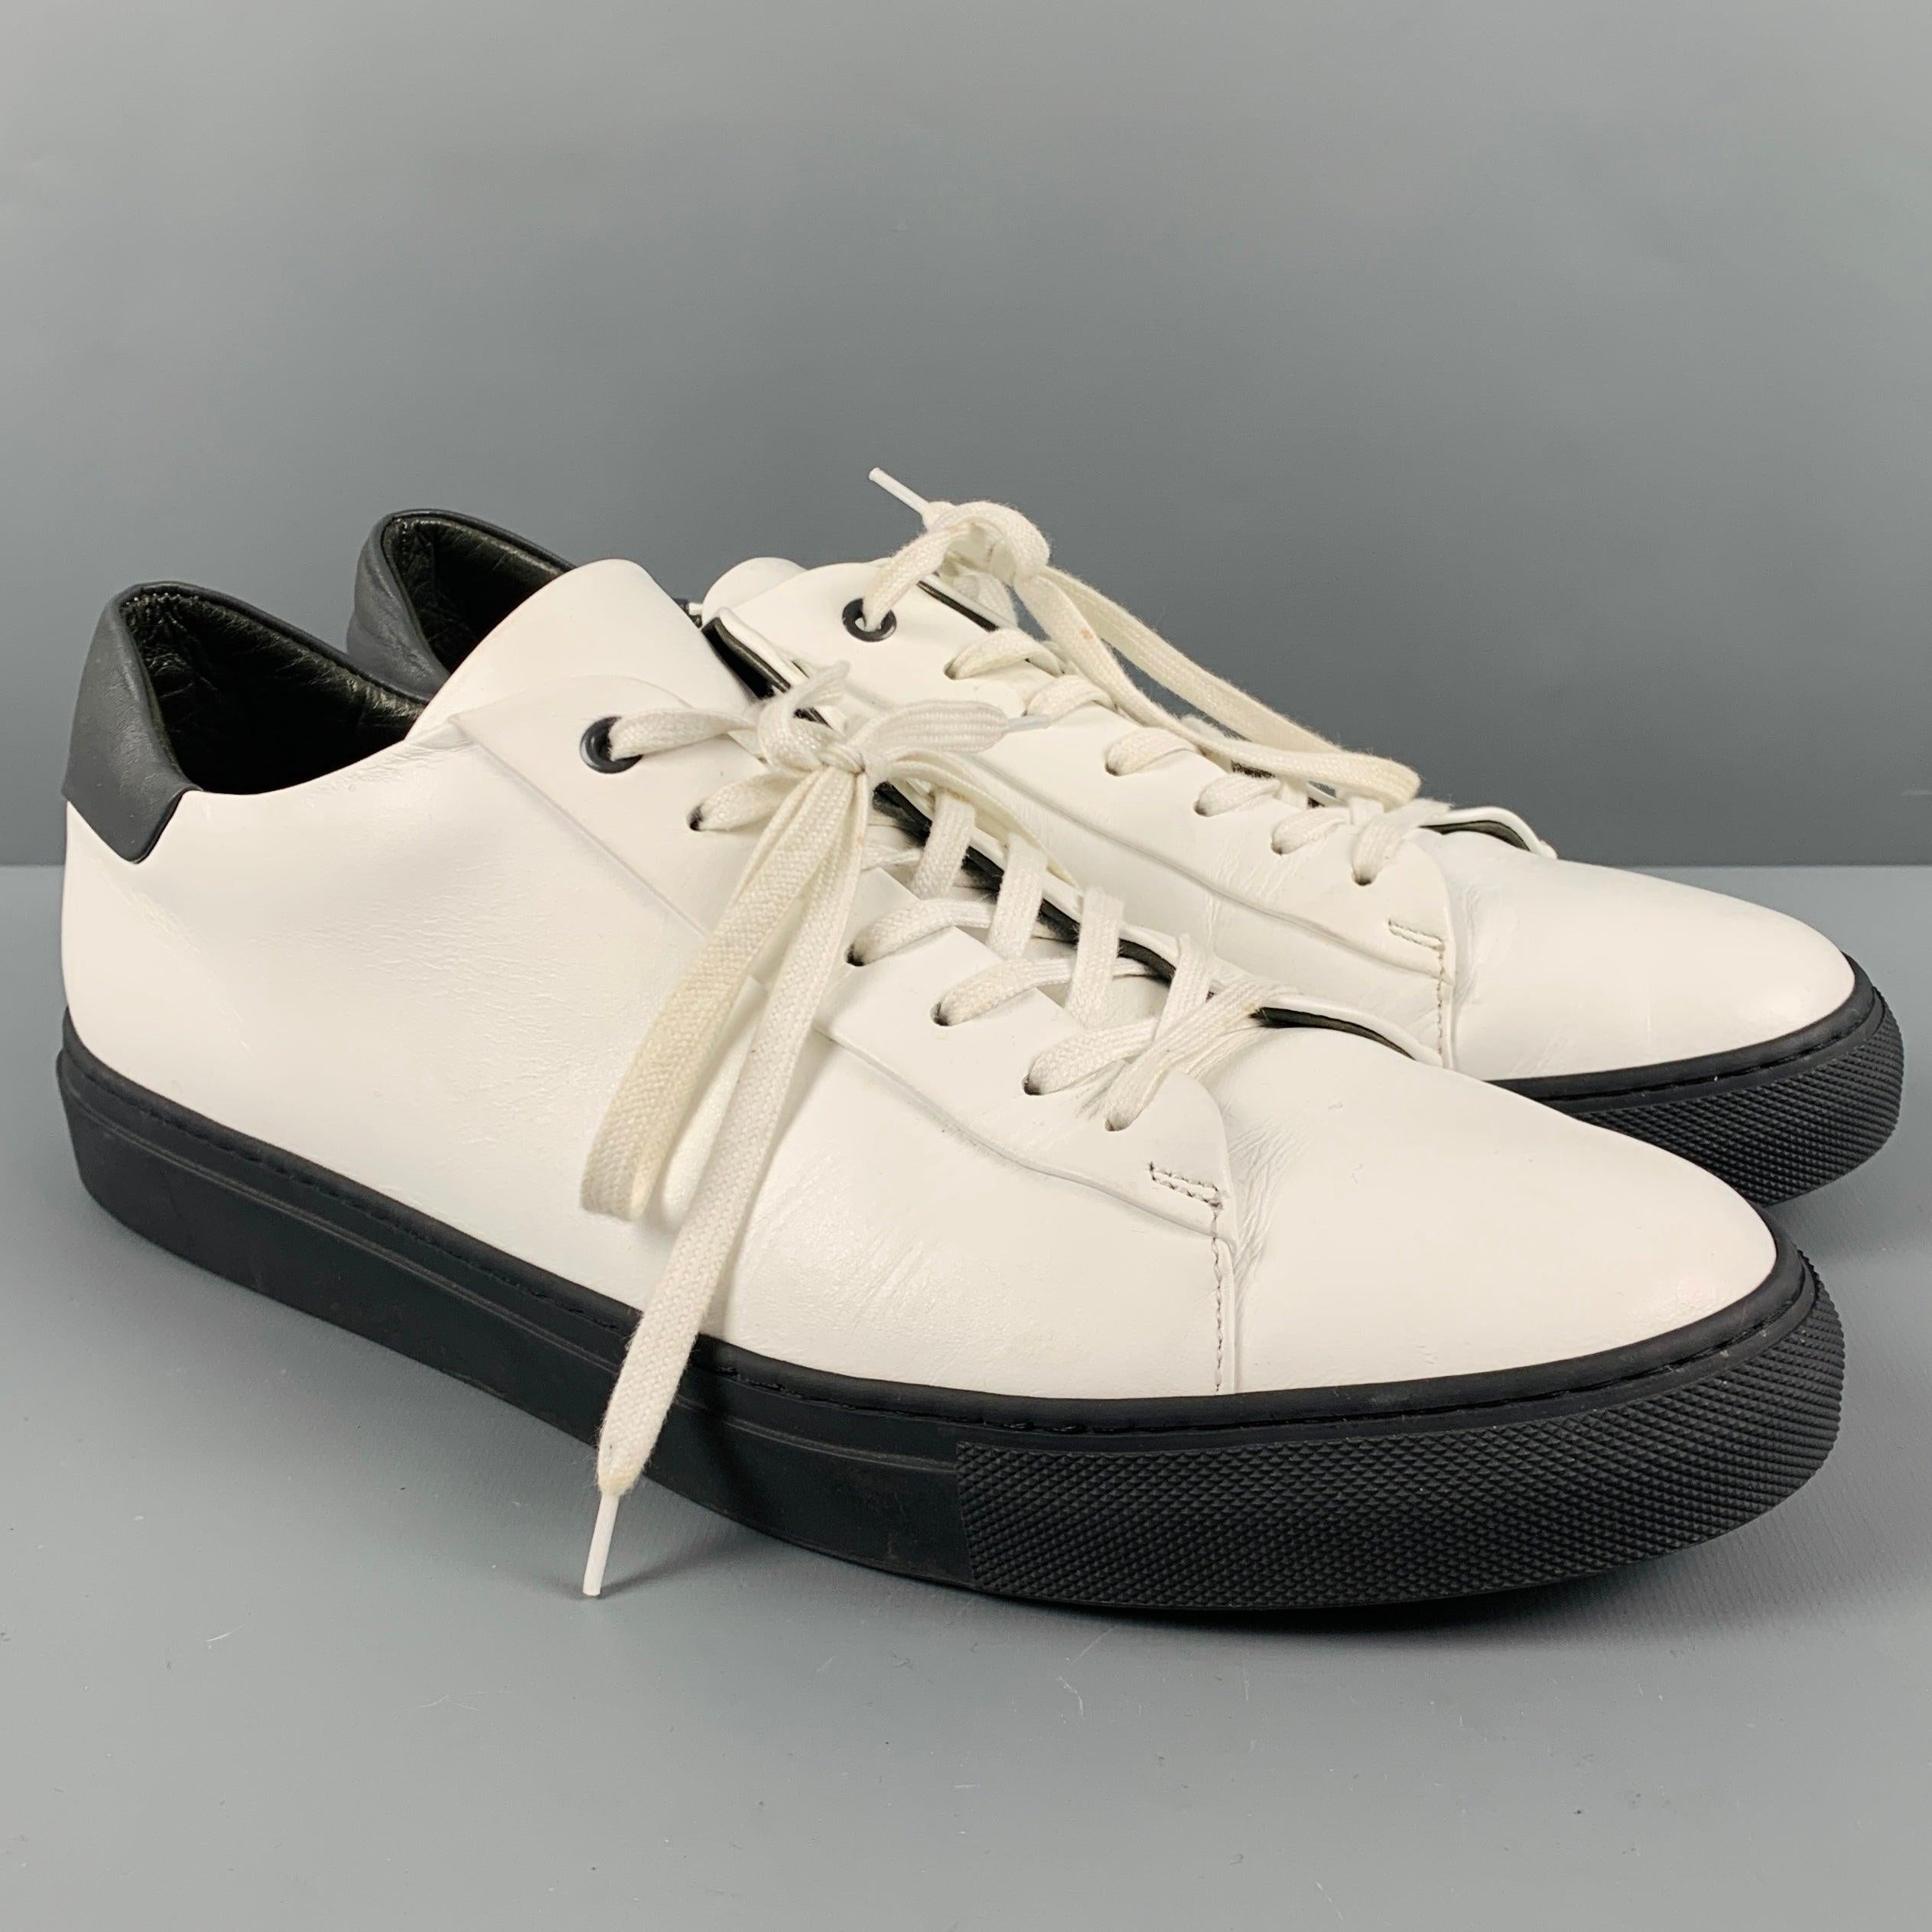 SAKS FIFTH AVENUE lace-up shoes
in a white leather fabric featuring black leather trim, low top style, and black rubber sole. Made in Italy.Excellent Pre-Owned Condition. 

Marked:   11852 07 12Outsole: 12.5 inches  x 4.25 inches 
  
  
 
Reference